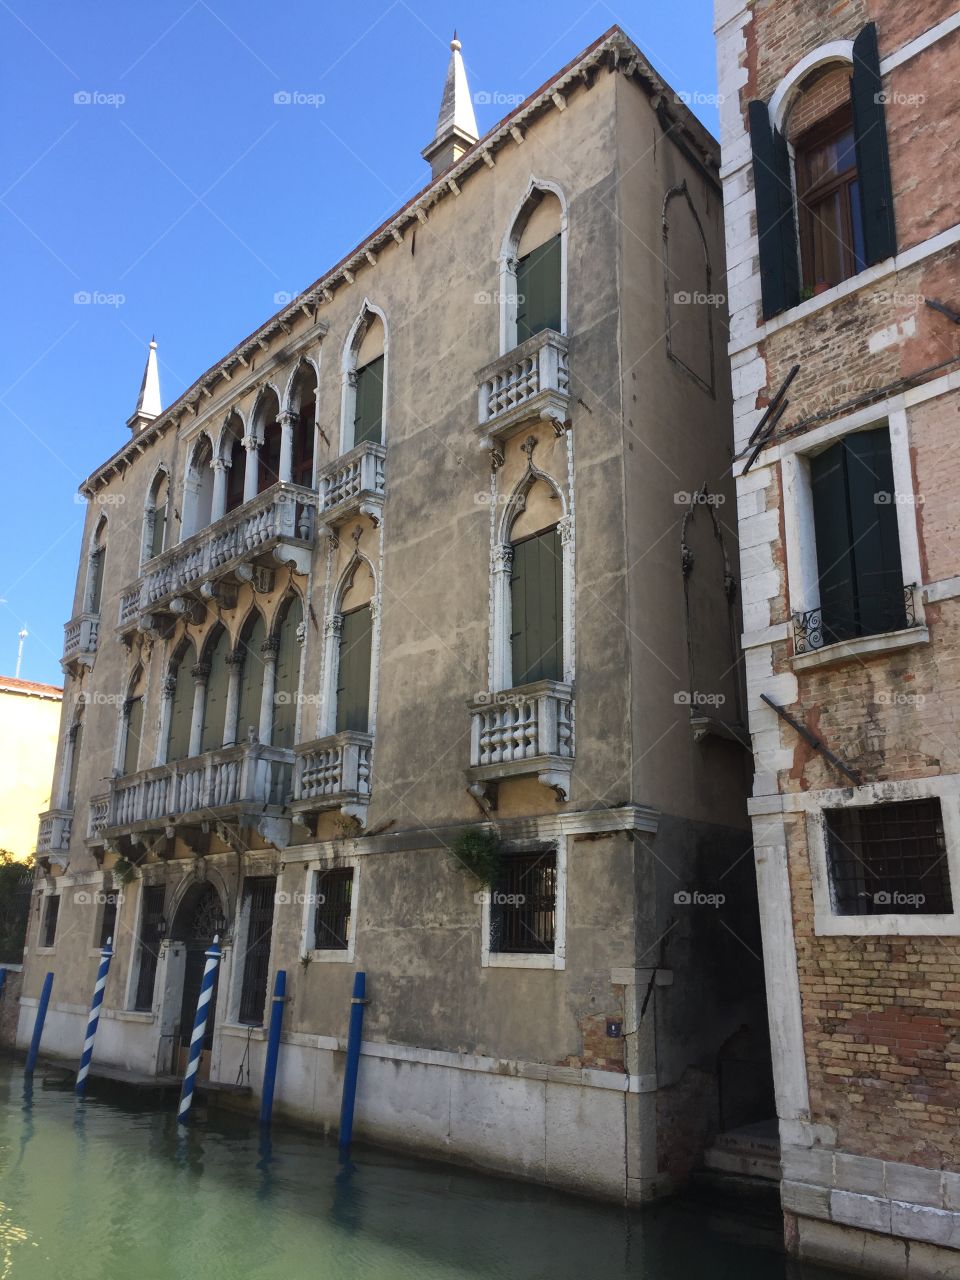 Architecture and landscapes in Venice - Italy 